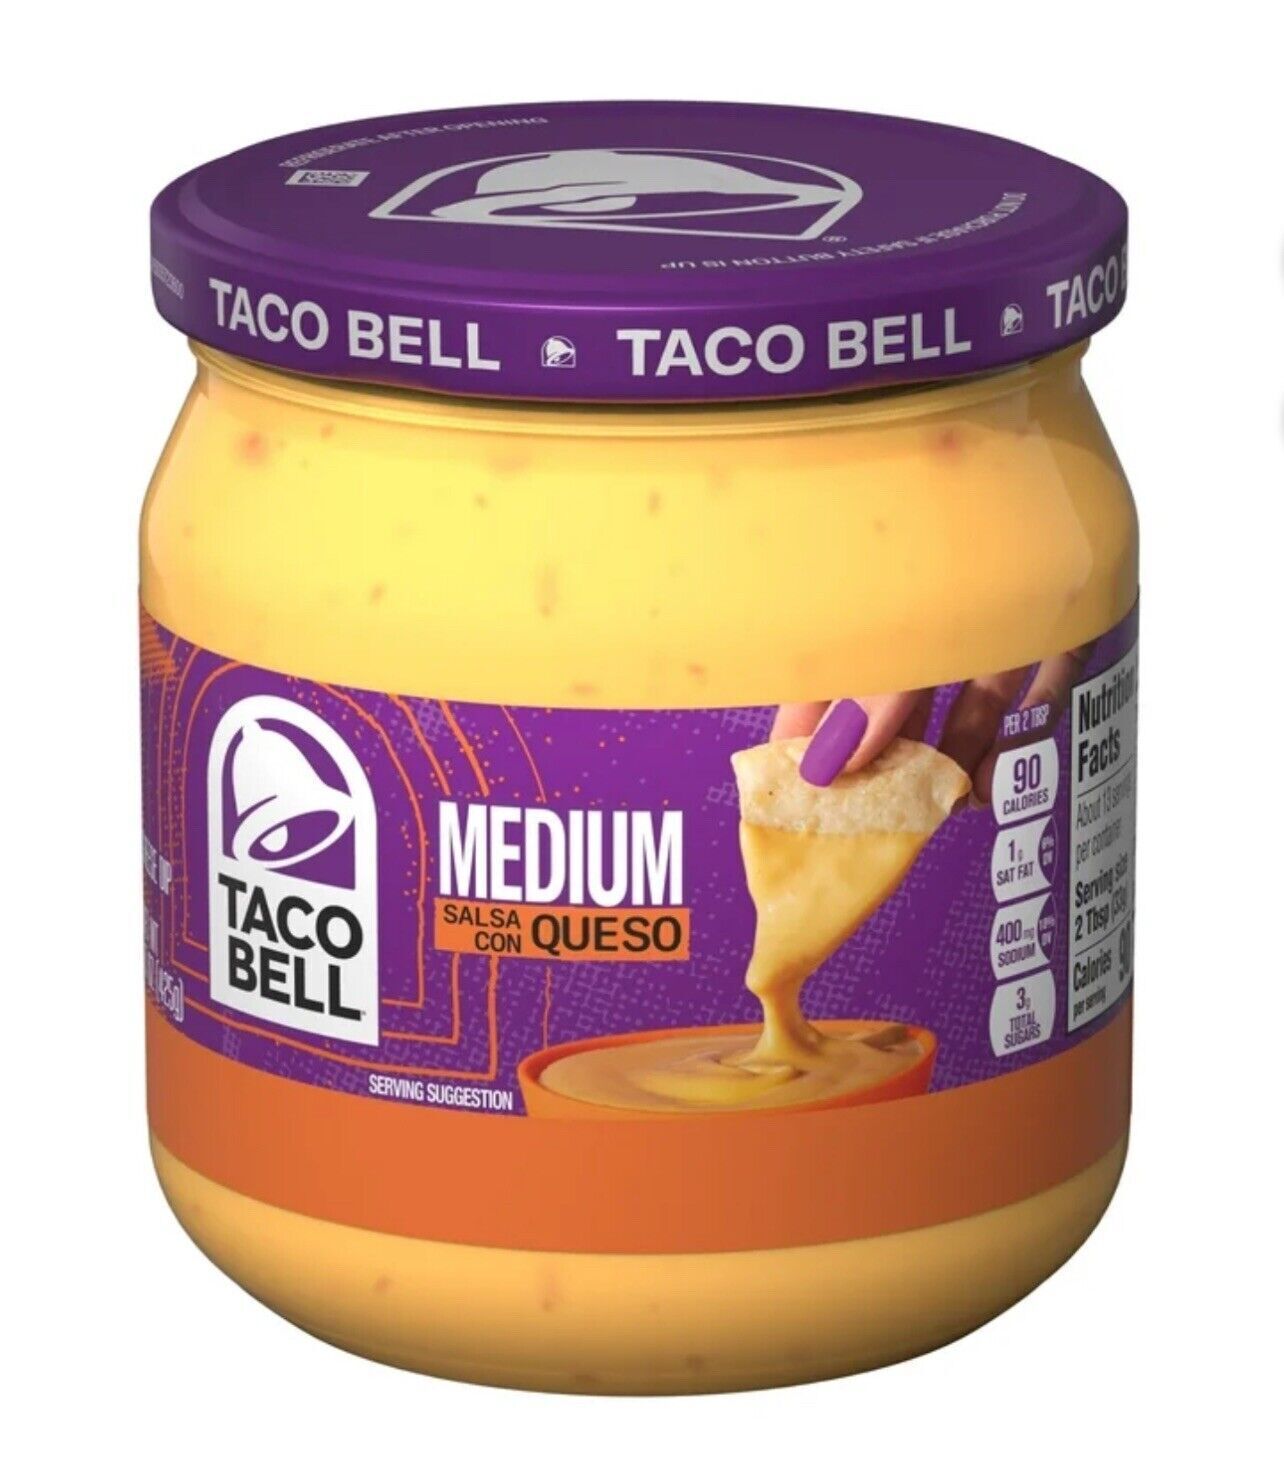 🚨New Limited Edition Exclusive TACO BELL Sauces Cheese Salsa Bottle Products